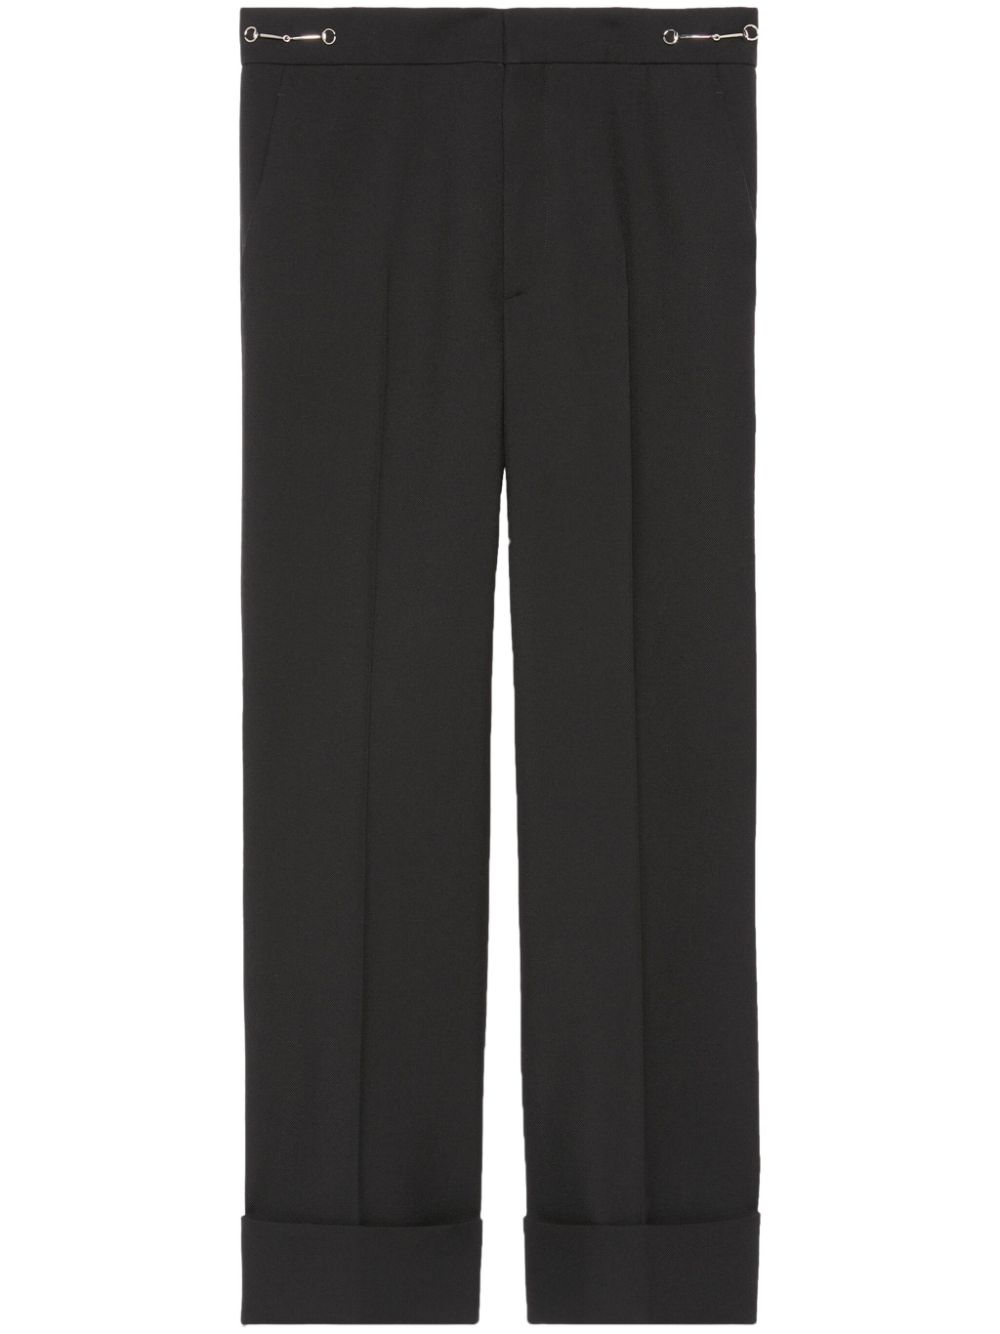 GUCCI Luxurious Black Wool Trousers with Horsebit Detail for Women